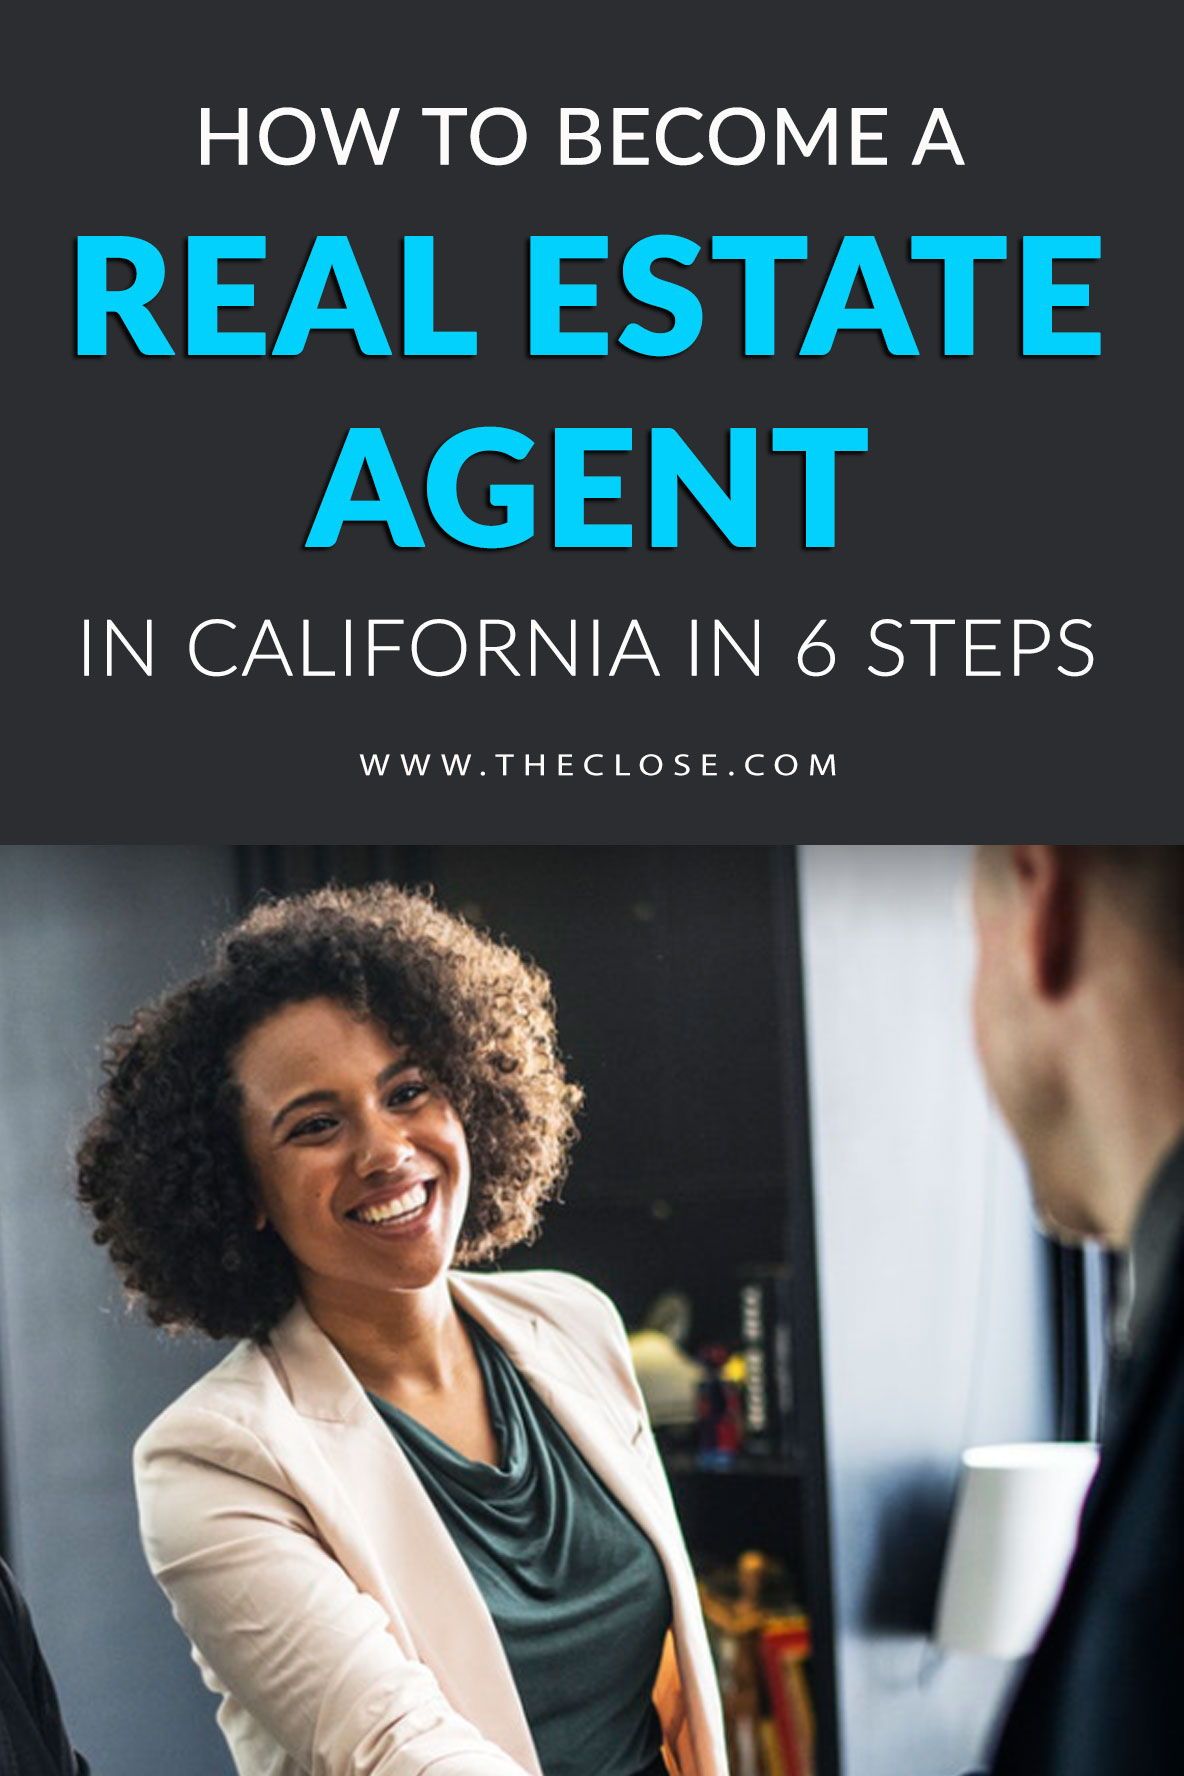 how mich do real estate agents make